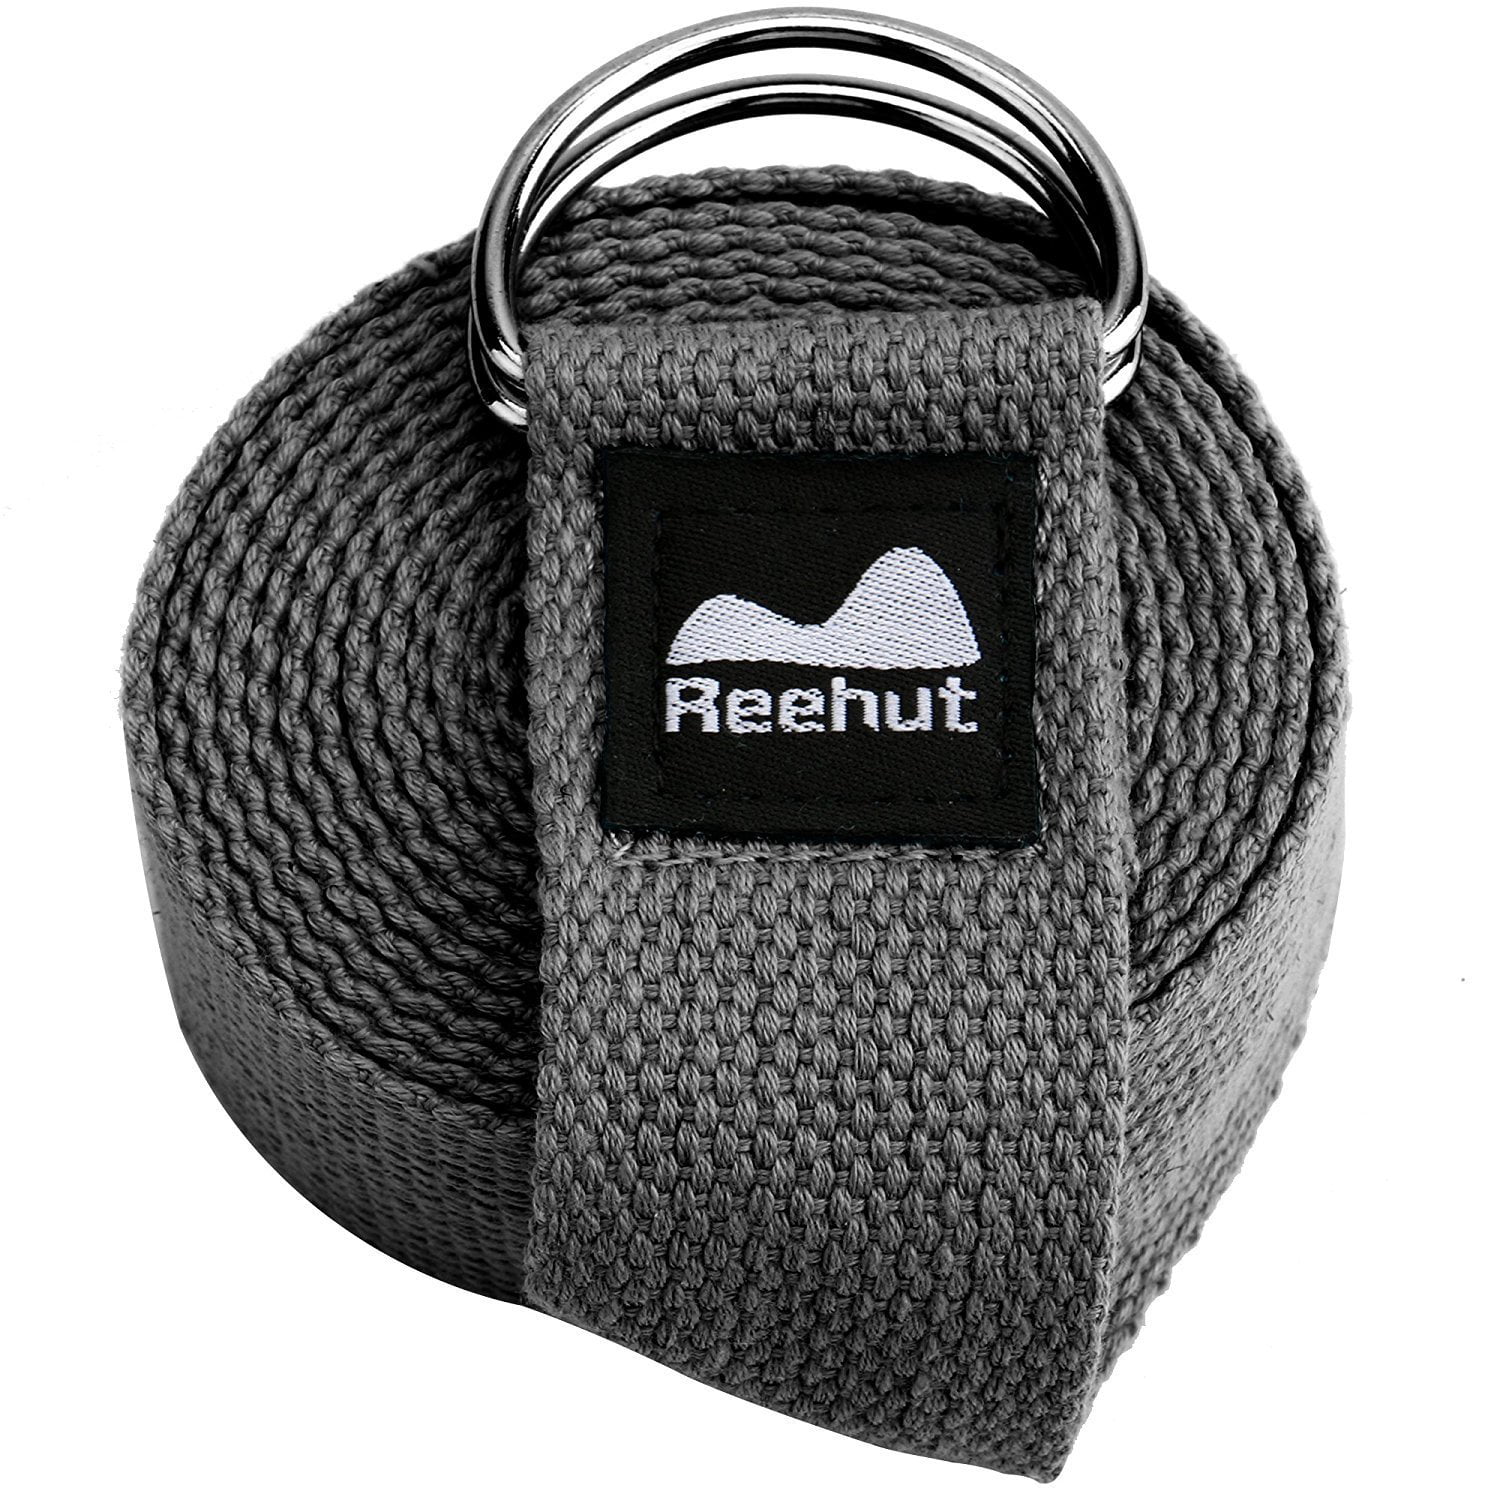 Reehut Fitness Exercise Yoga Strap w/ Adjustable D-Ring Buckle for  Stretching, Flexibility and Physical Therapy - (Black, 6ft)